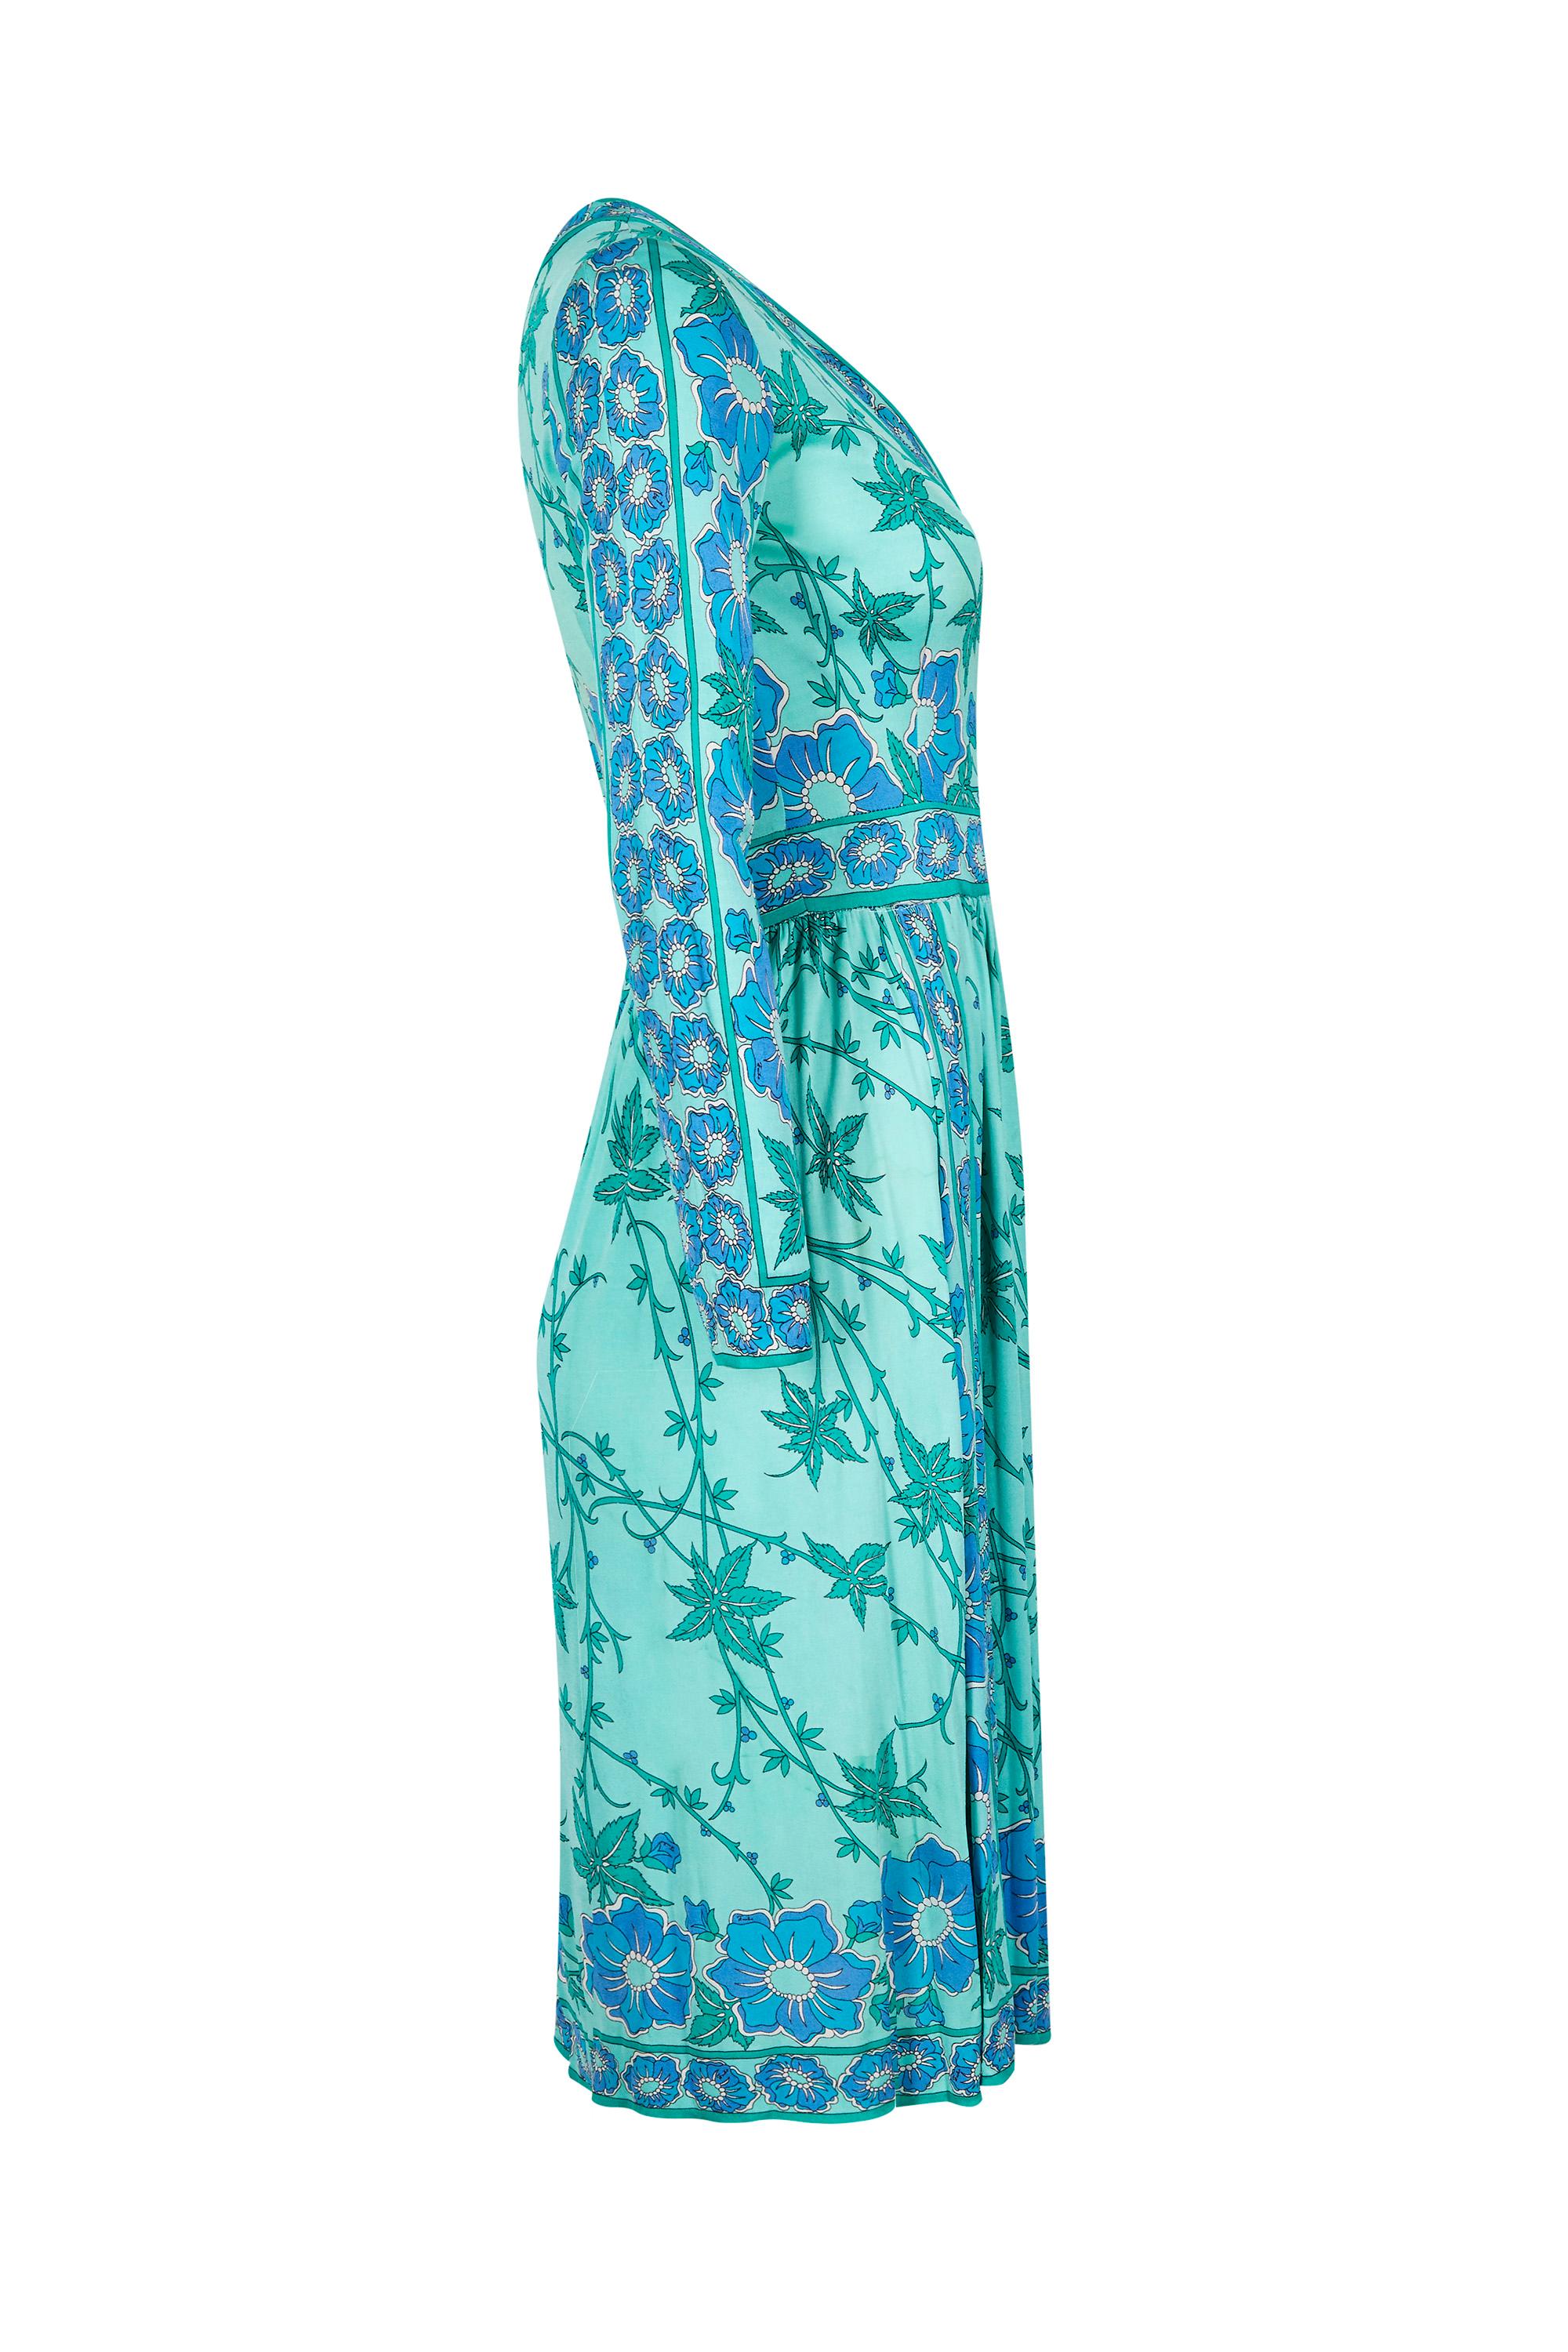 This beautiful 1970s turquoise printed silk jersey dress with an attractive cross over bodice is a classic piece by Emilio Pucci, retailed at Saks Fifth avenue and is in lovely vintage condition.  The soft silk jersey fabric has retained all of its